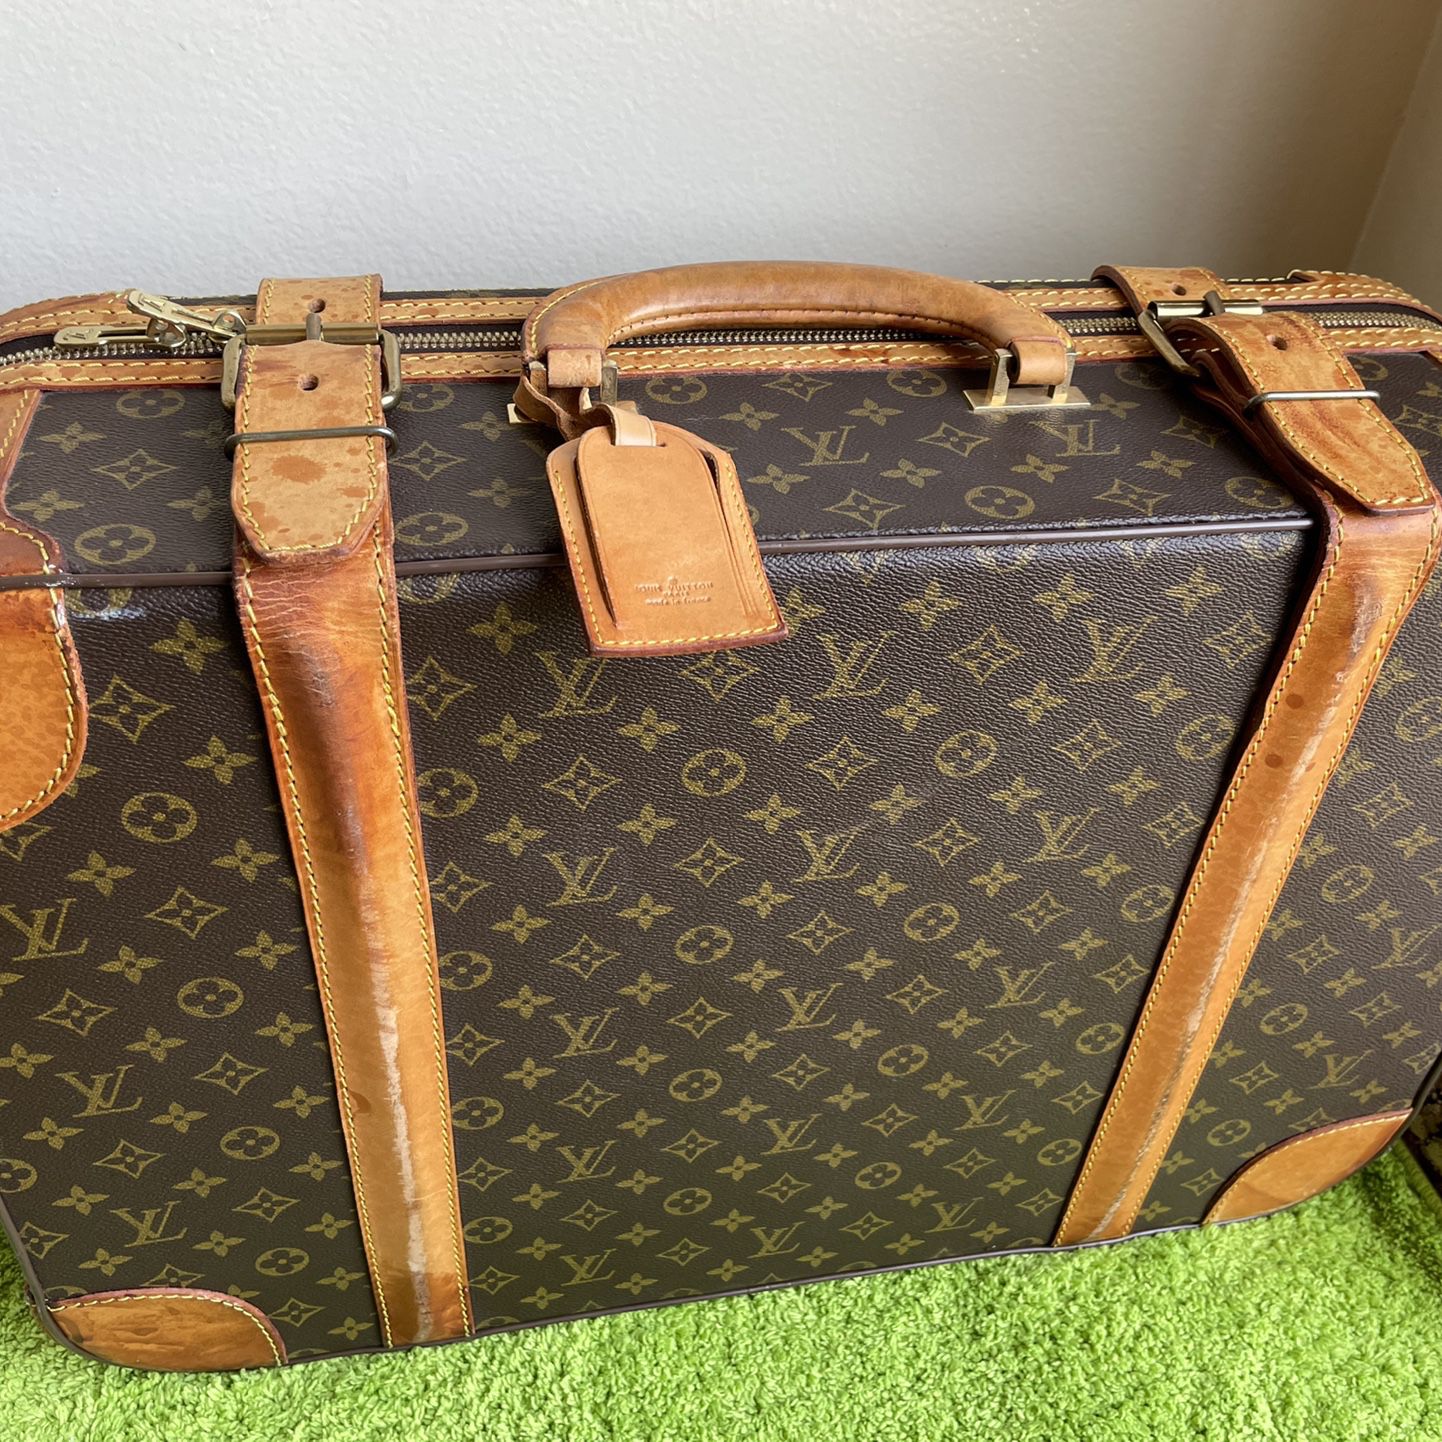 Vintage louis Vuitton Combination Lock for Sale in San Diego, CA - OfferUp